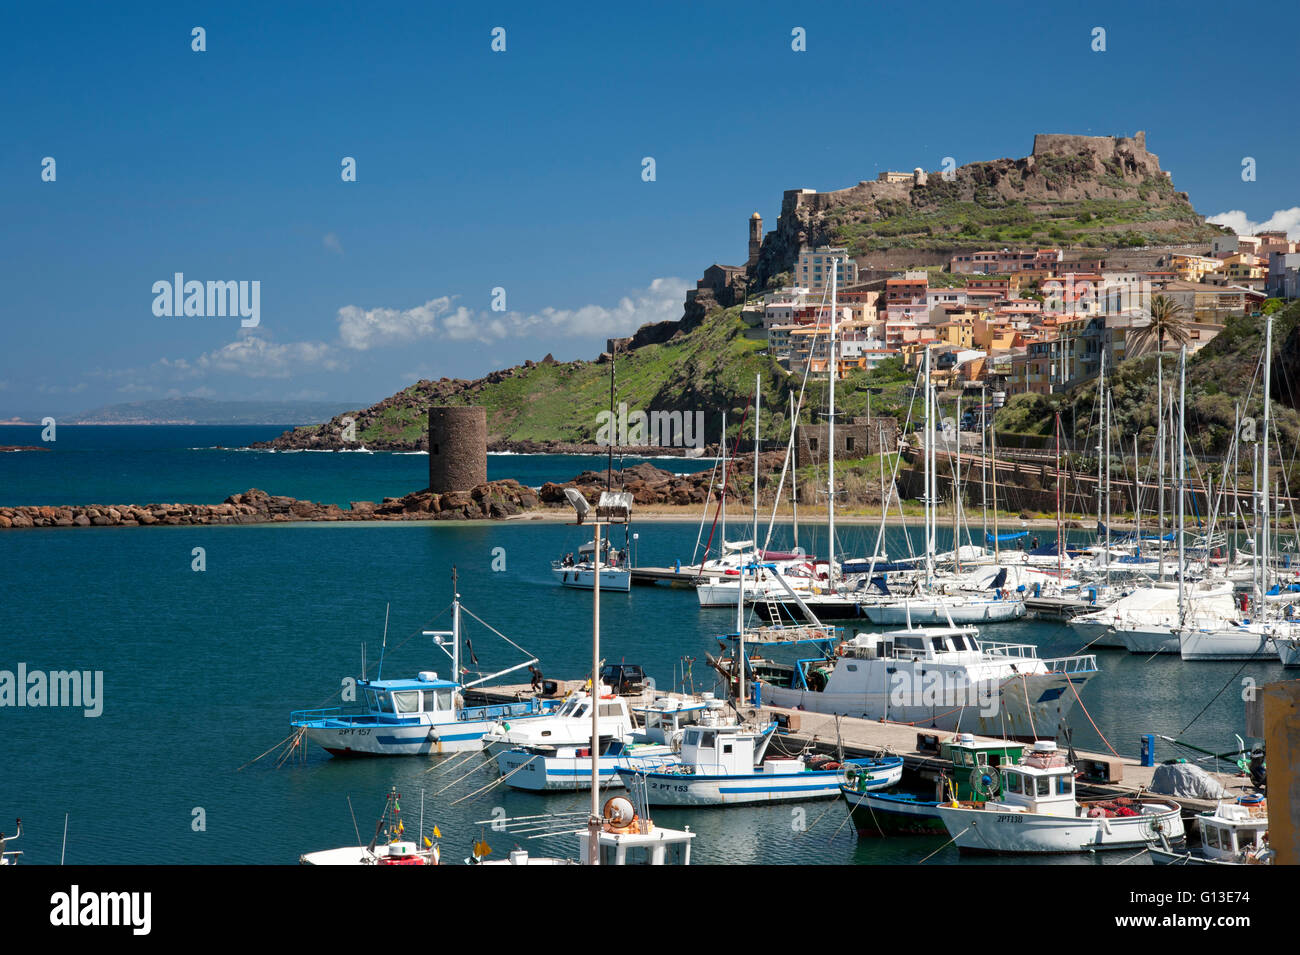 Castelsardo,Sassari,Sardinia, Italy, 10/4/2016. View of boats at moor on the port, the old tower and the colored old town. Stock Photo